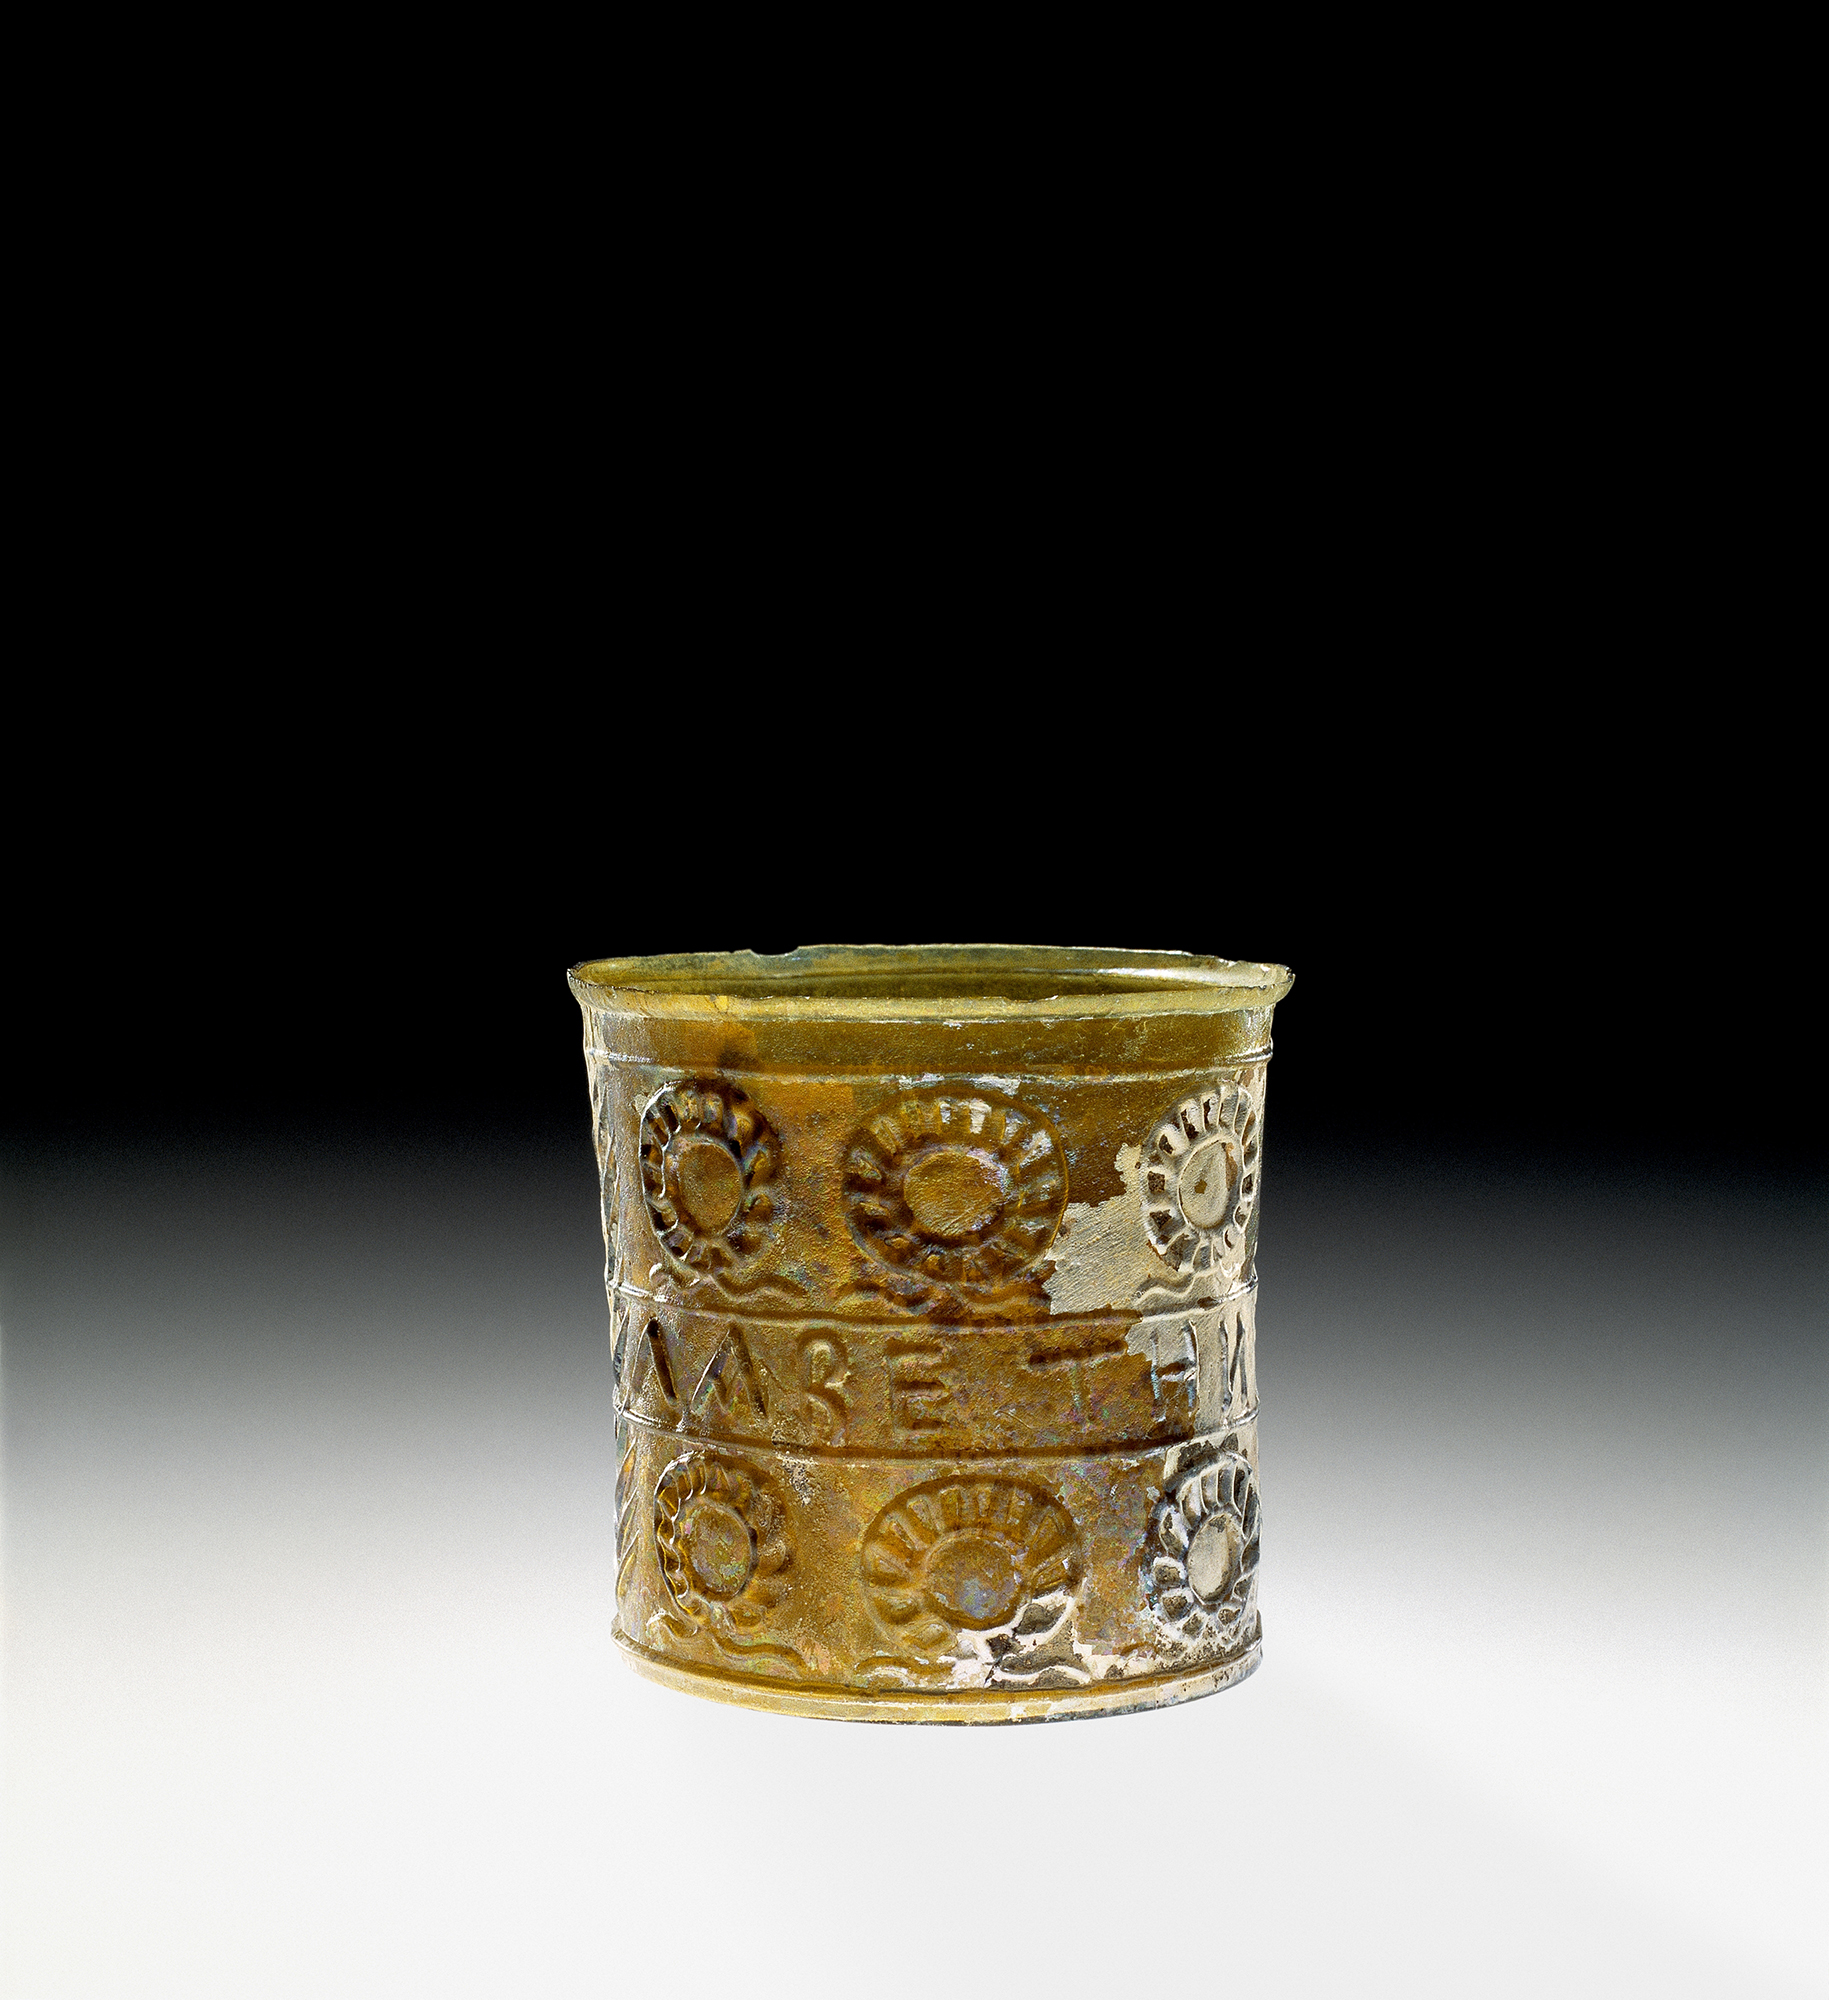 Glass cup, Roman, Early Imperial, Julio-Claudian